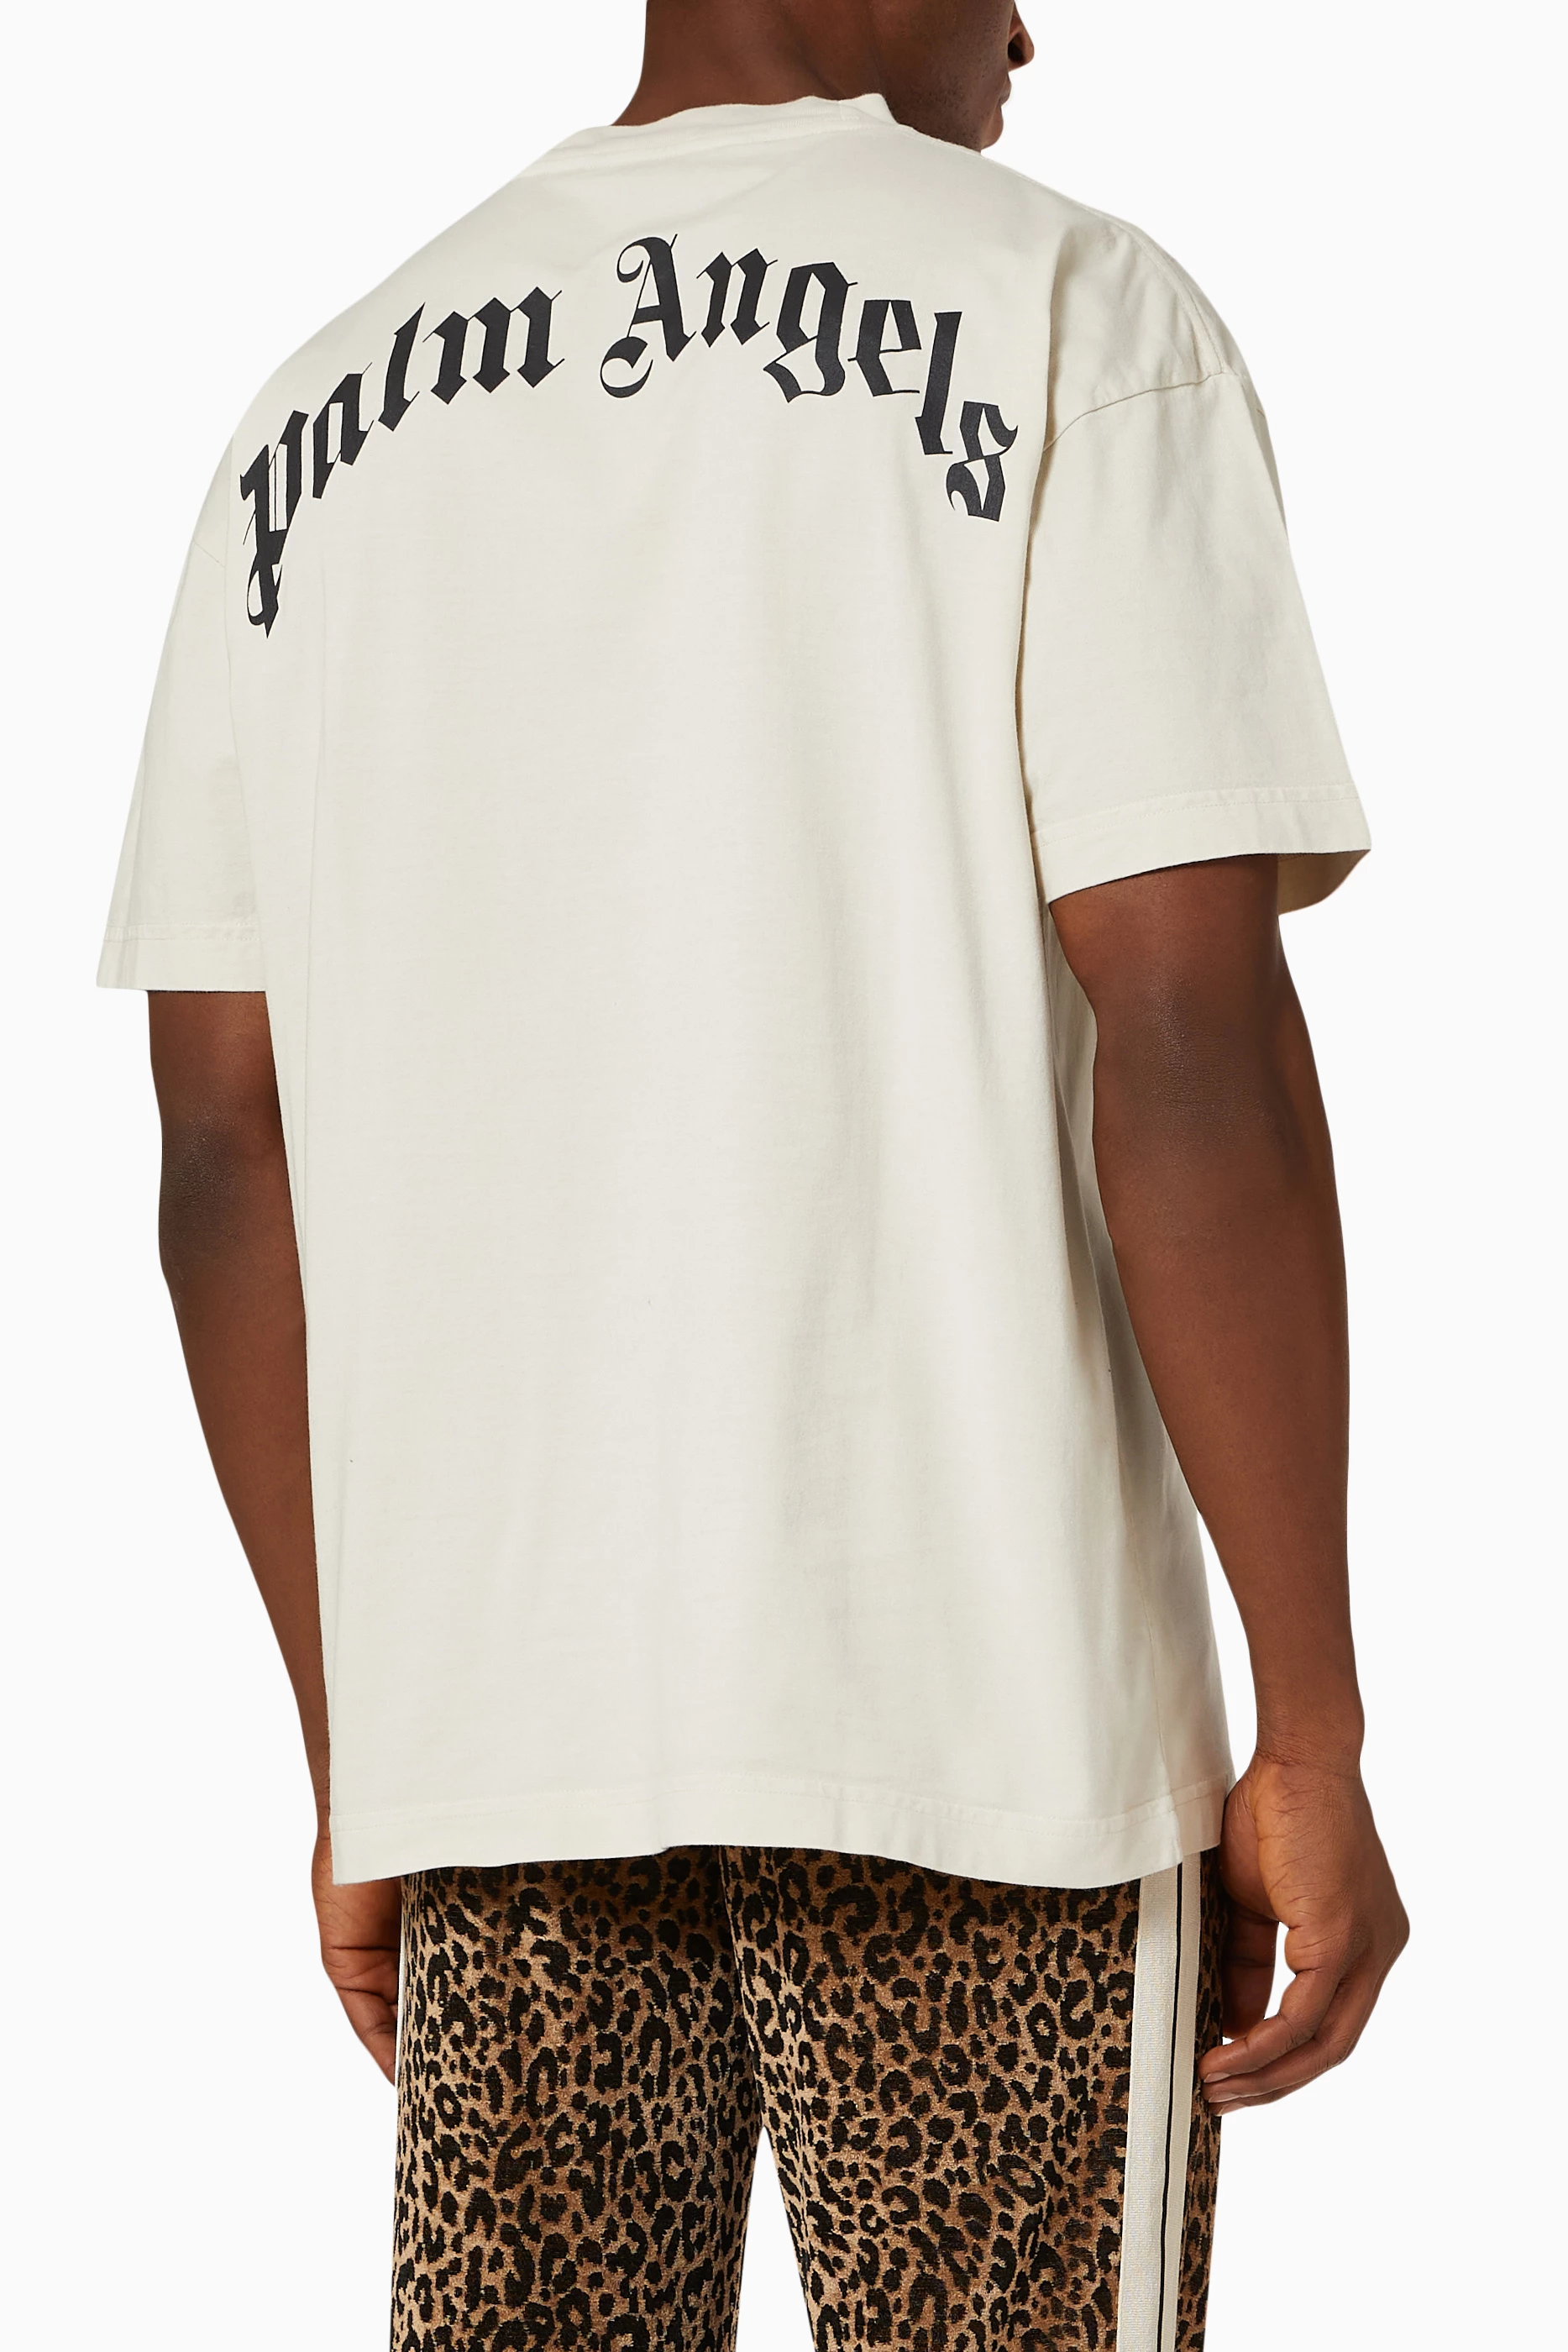 PALM ANGELS GD Skull Classic T-Shirt in Off White/Black – Court Order